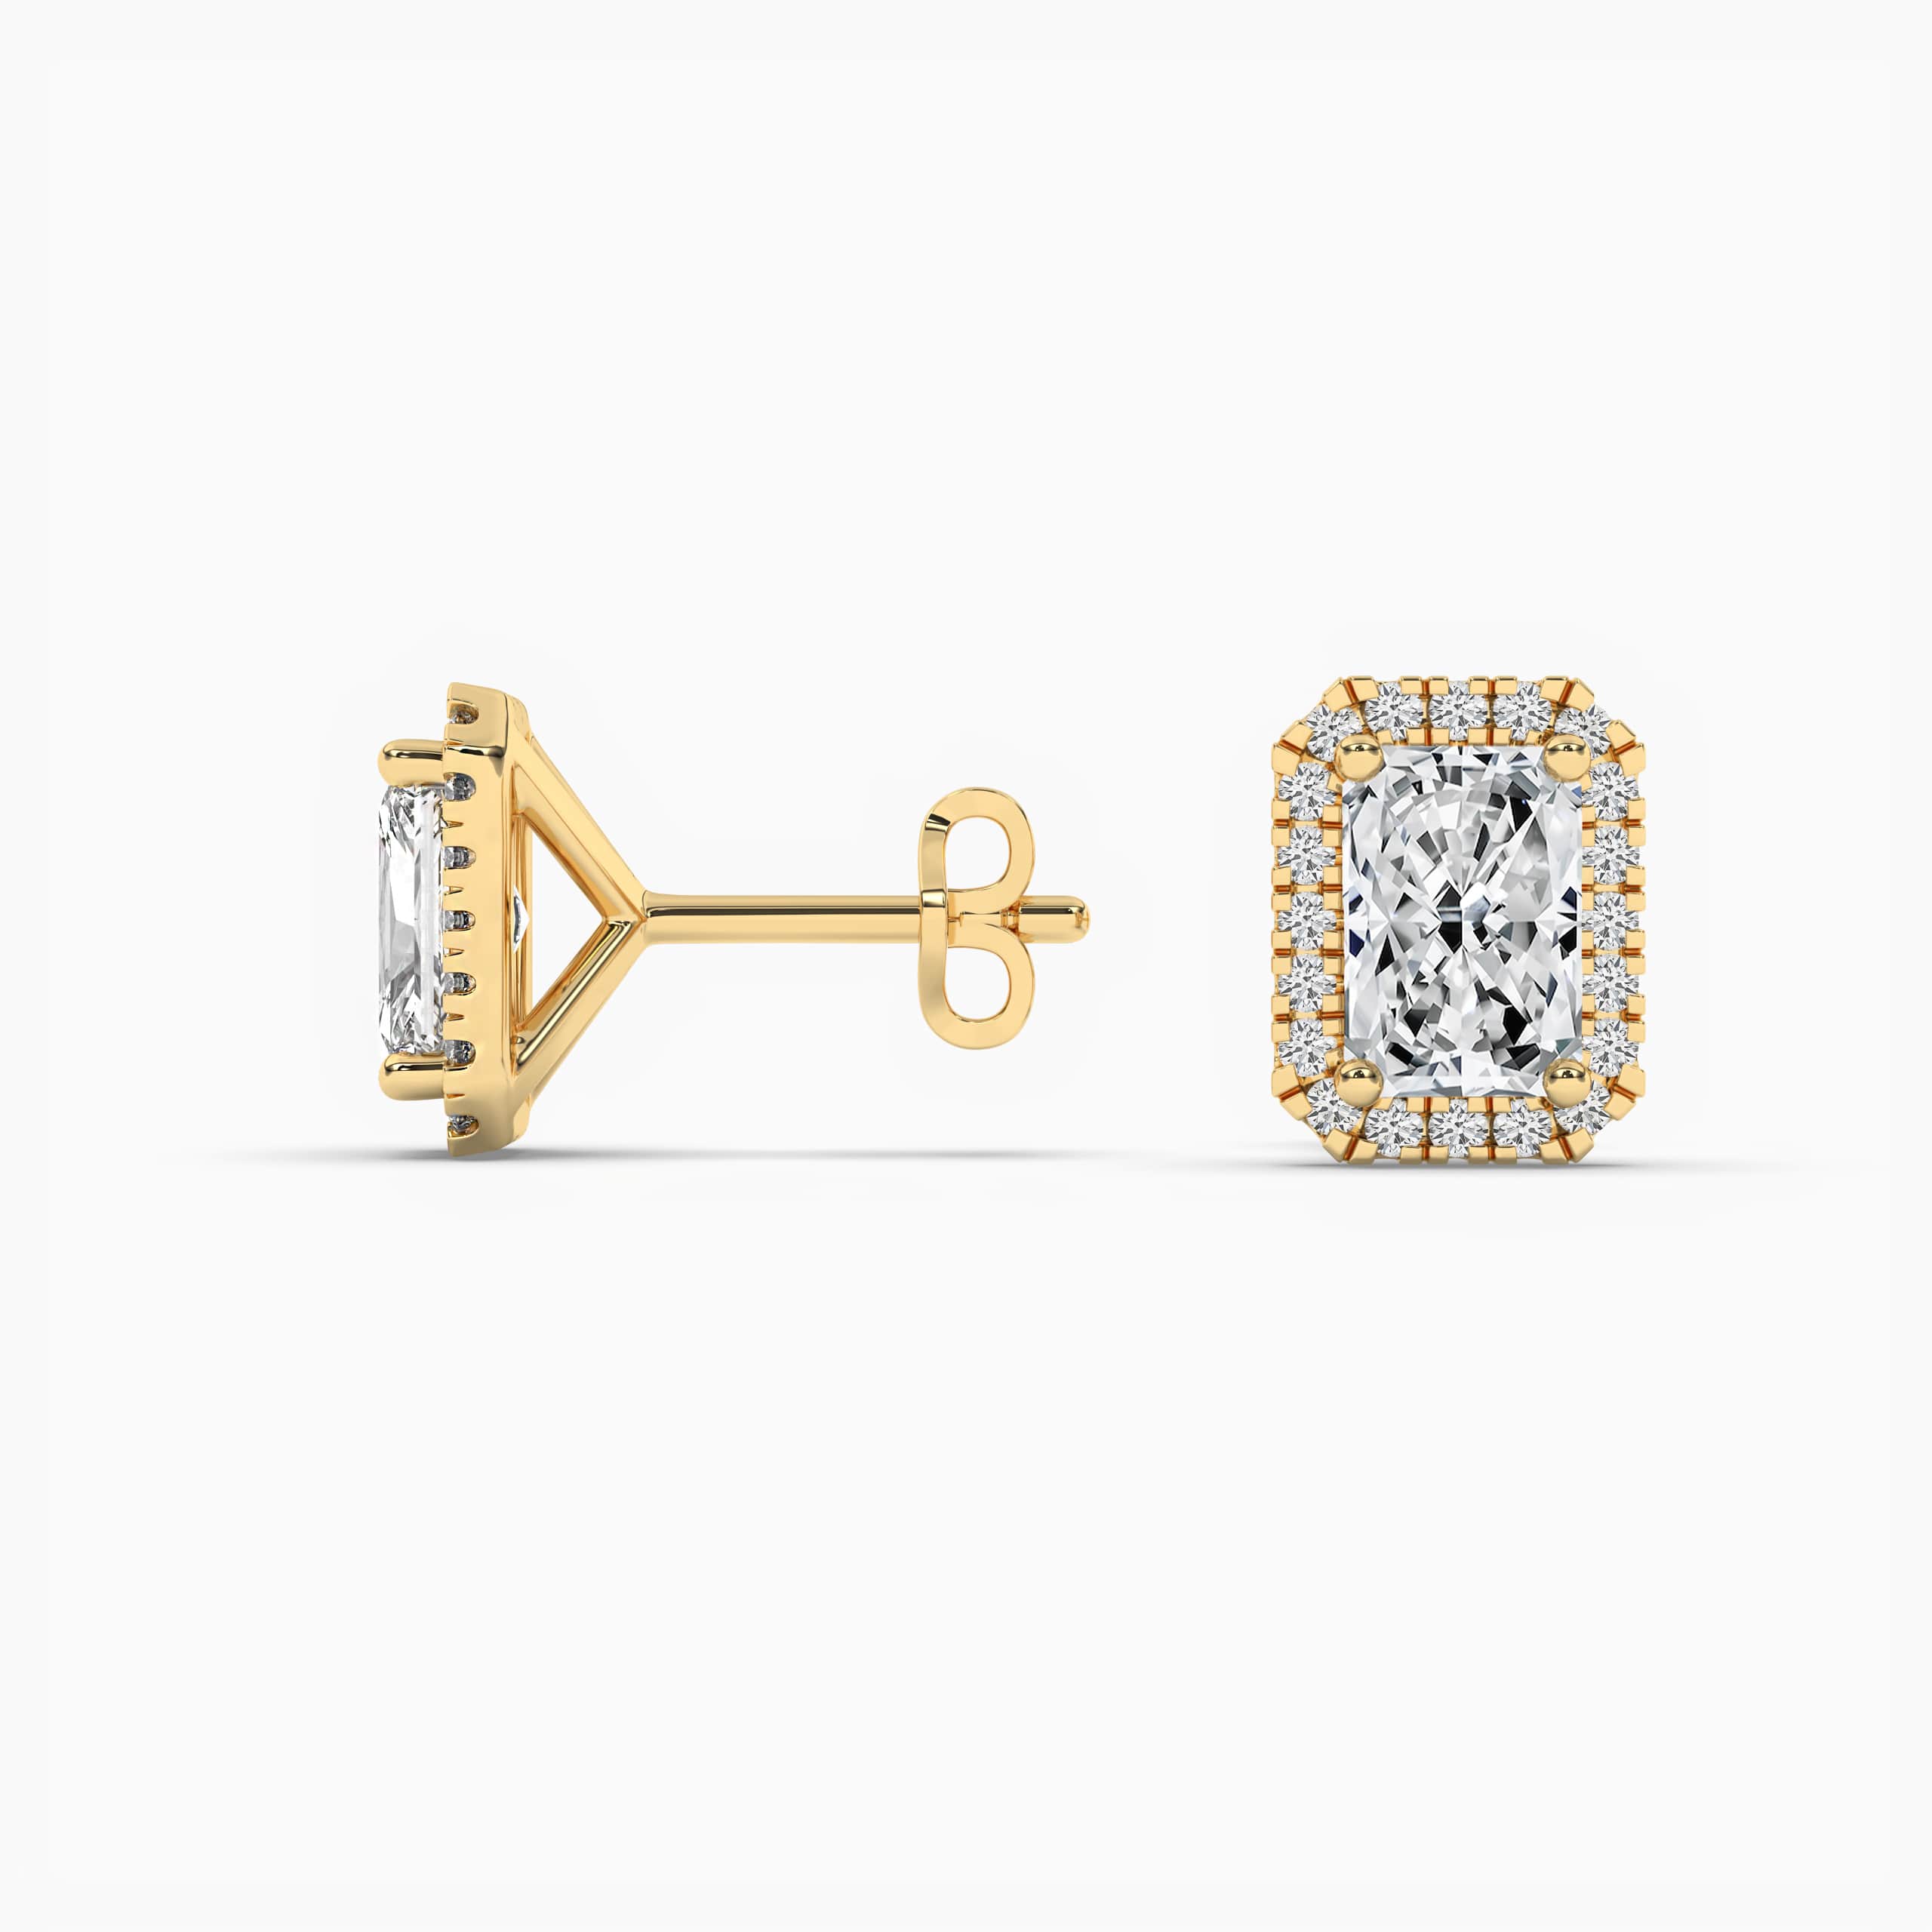 Radiant Cut Yellow and White Diamond Stud Earrings